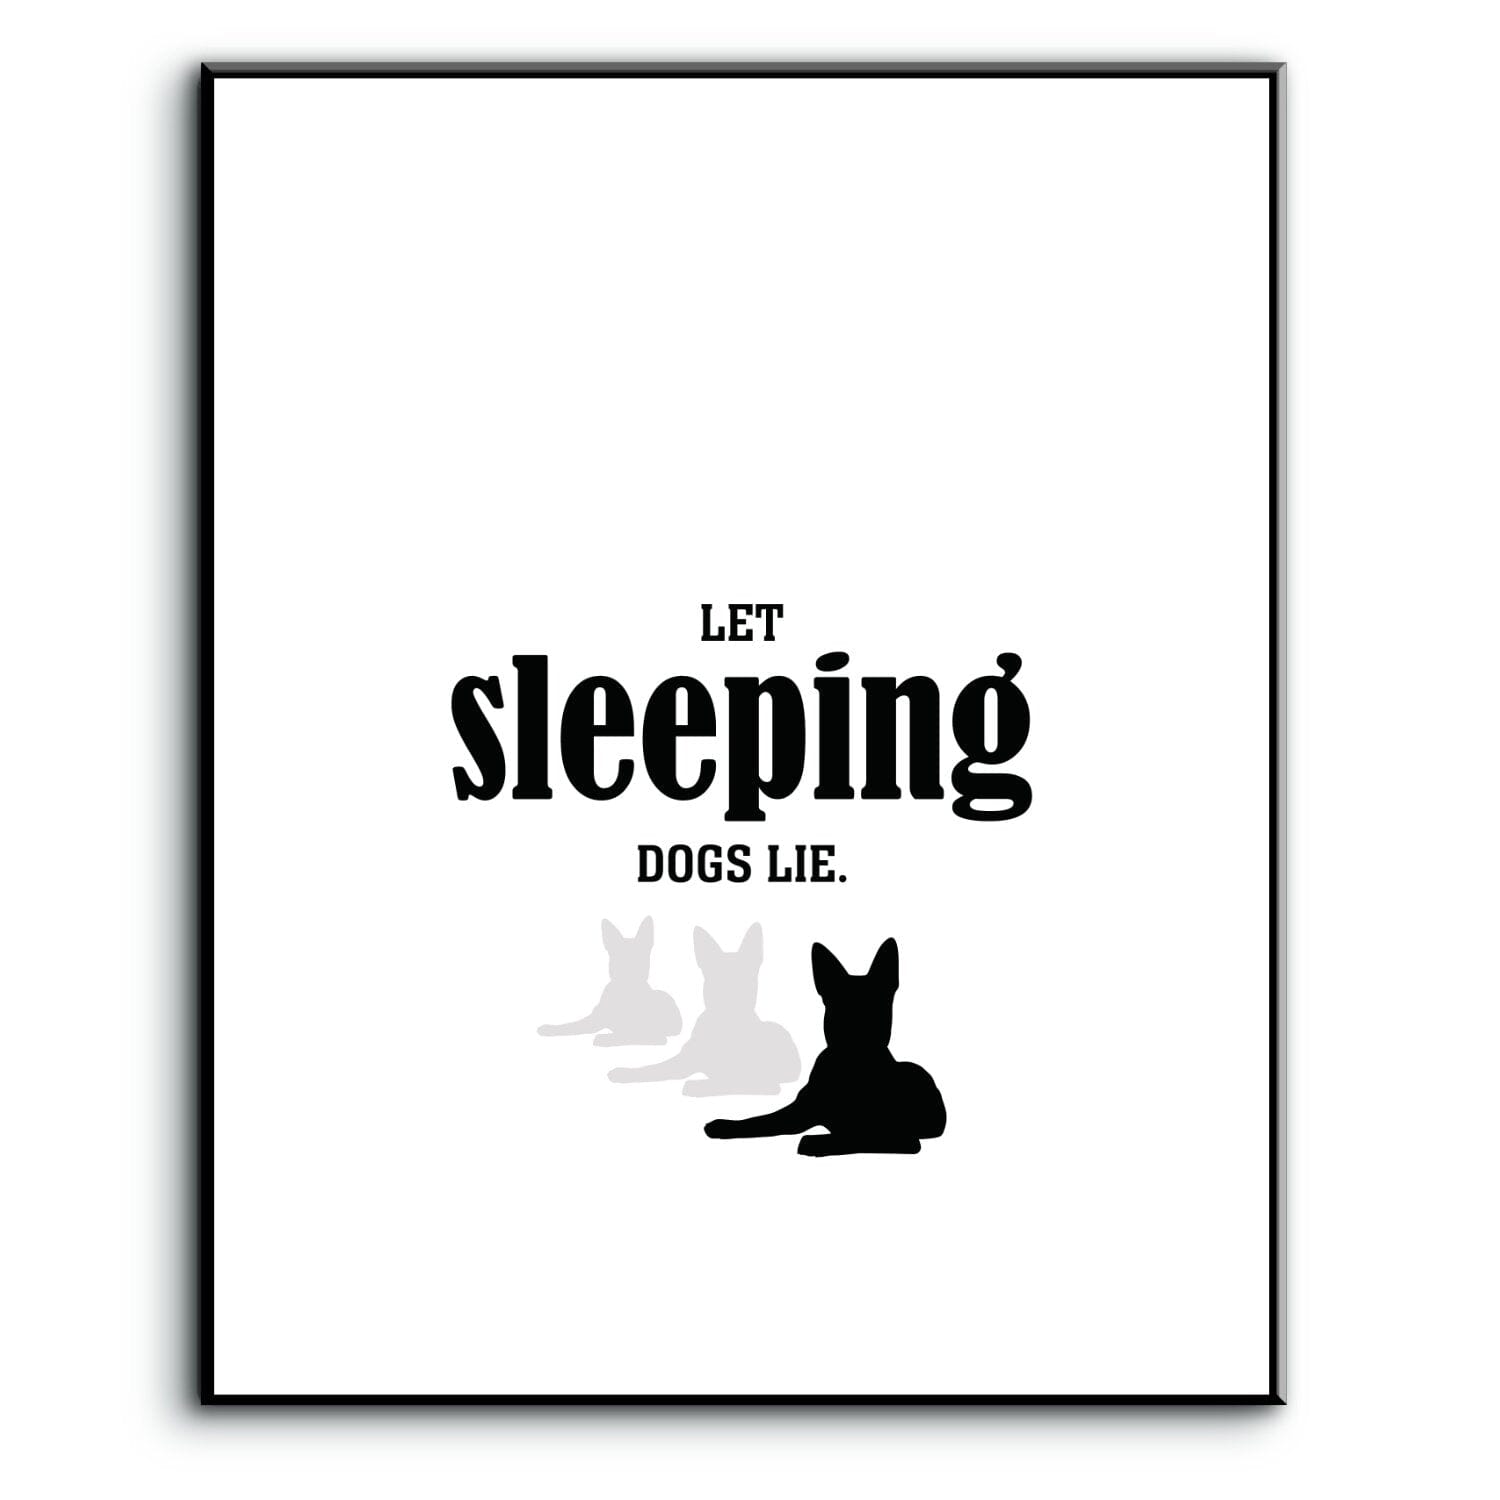 Let Sleeping Dogs Lie - Funny Wise and Witty Quote Wall Print Wise and Wiseass Quotes Song Lyrics Art 8x10 Plaque Mount 